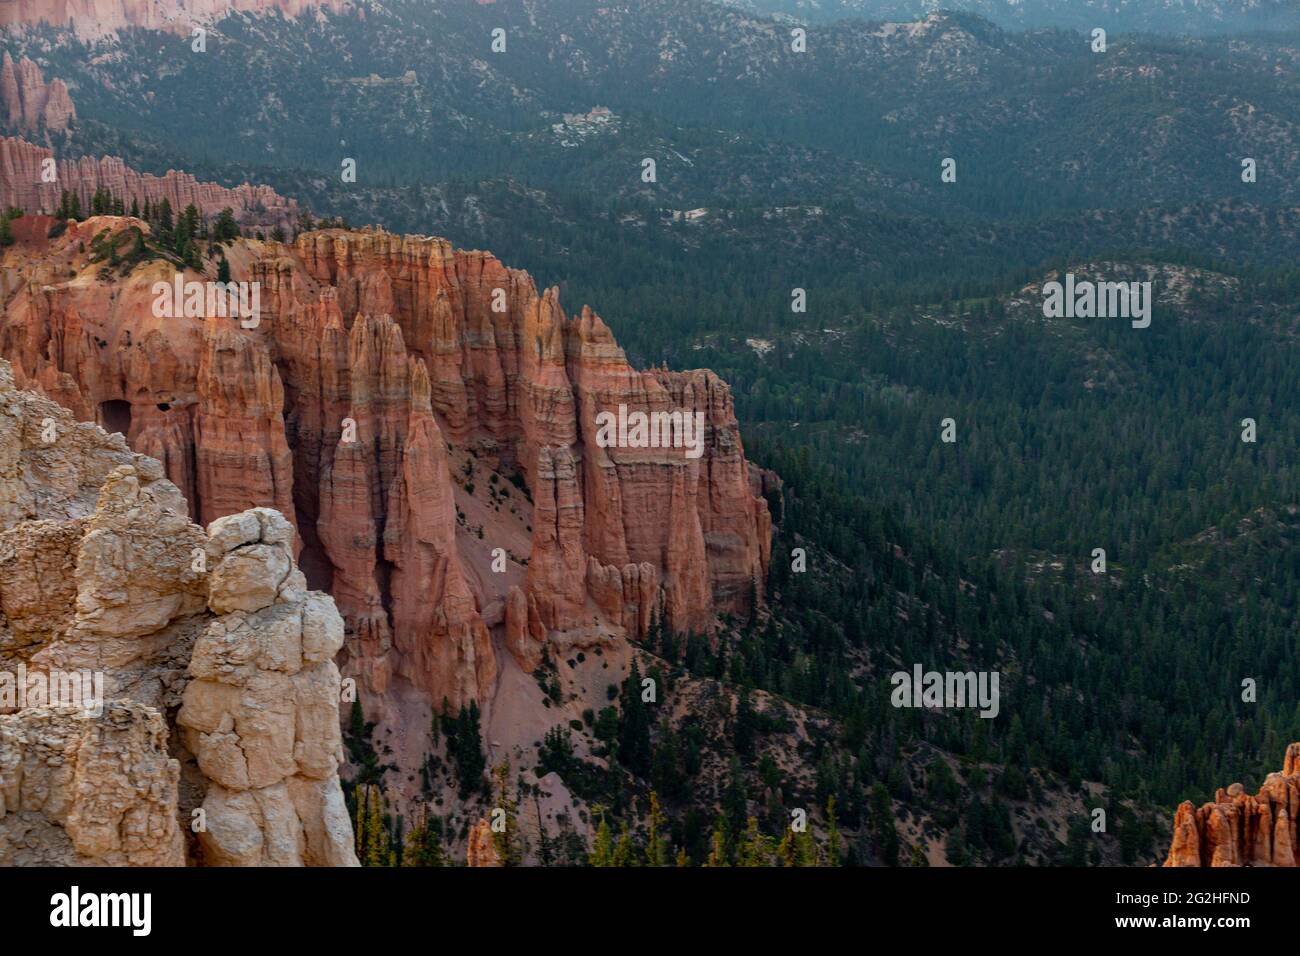 Rainbow Point - a National park peak with red & pink cliffs & rock formations, spruce & fir forest & hiking trails. Bryce Canyon National Park, Utah, USA Stock Photo